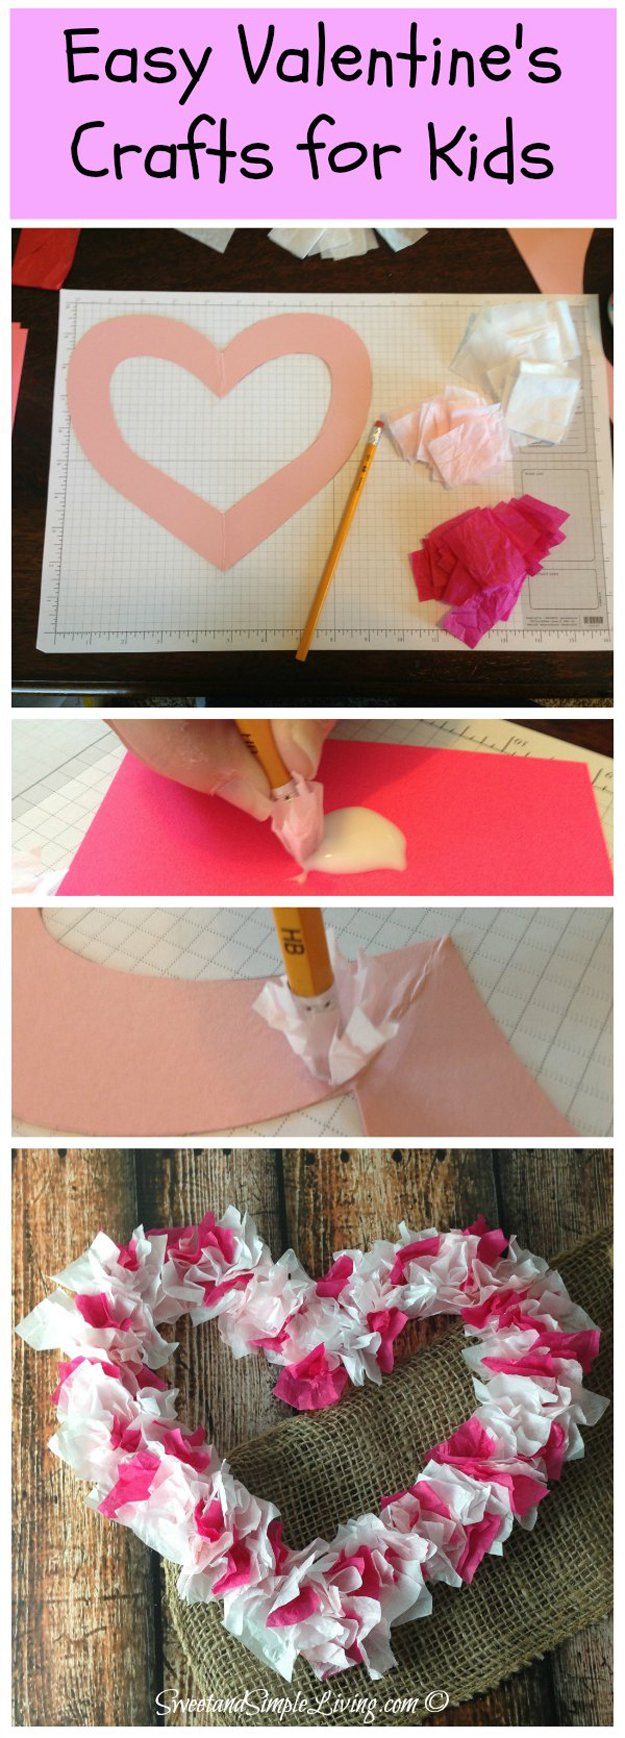 Toddler DIY Projects
 20 Homemade Valentine Crafts For Kids To Make DIY Ready